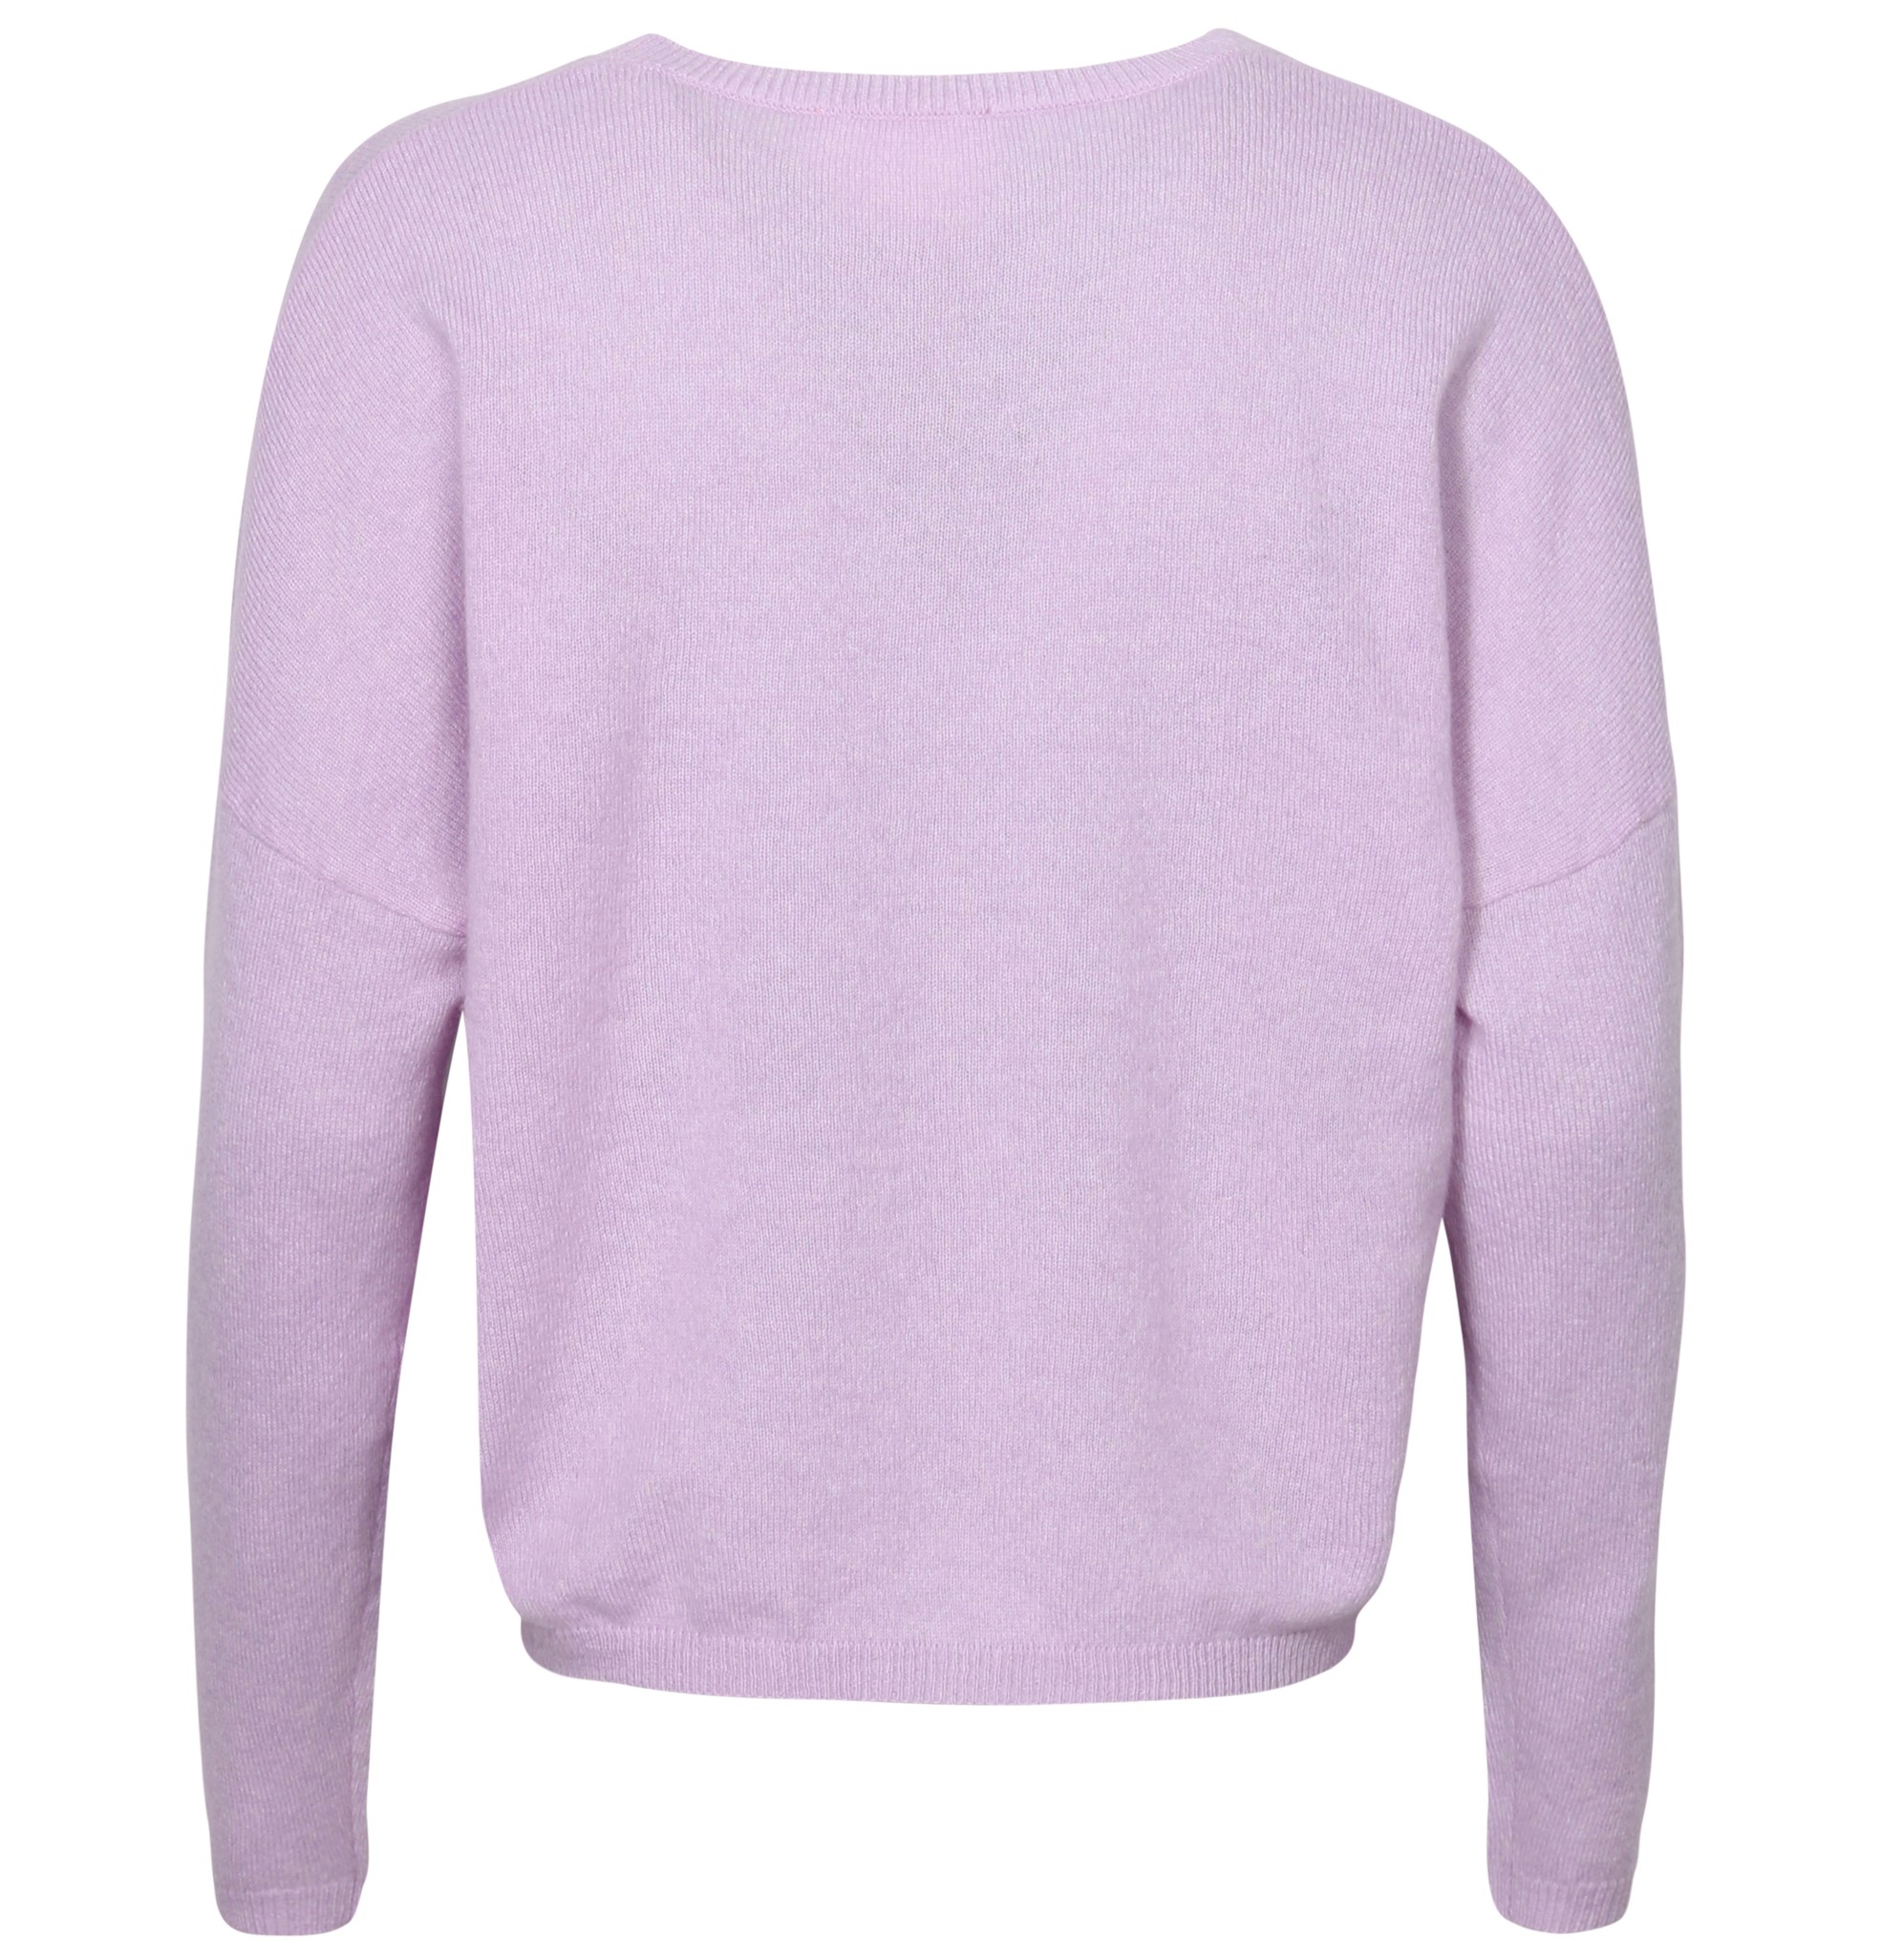 ABSOLUT CASHMERE Round Neck Sweater Kaira in Light Lilac XS